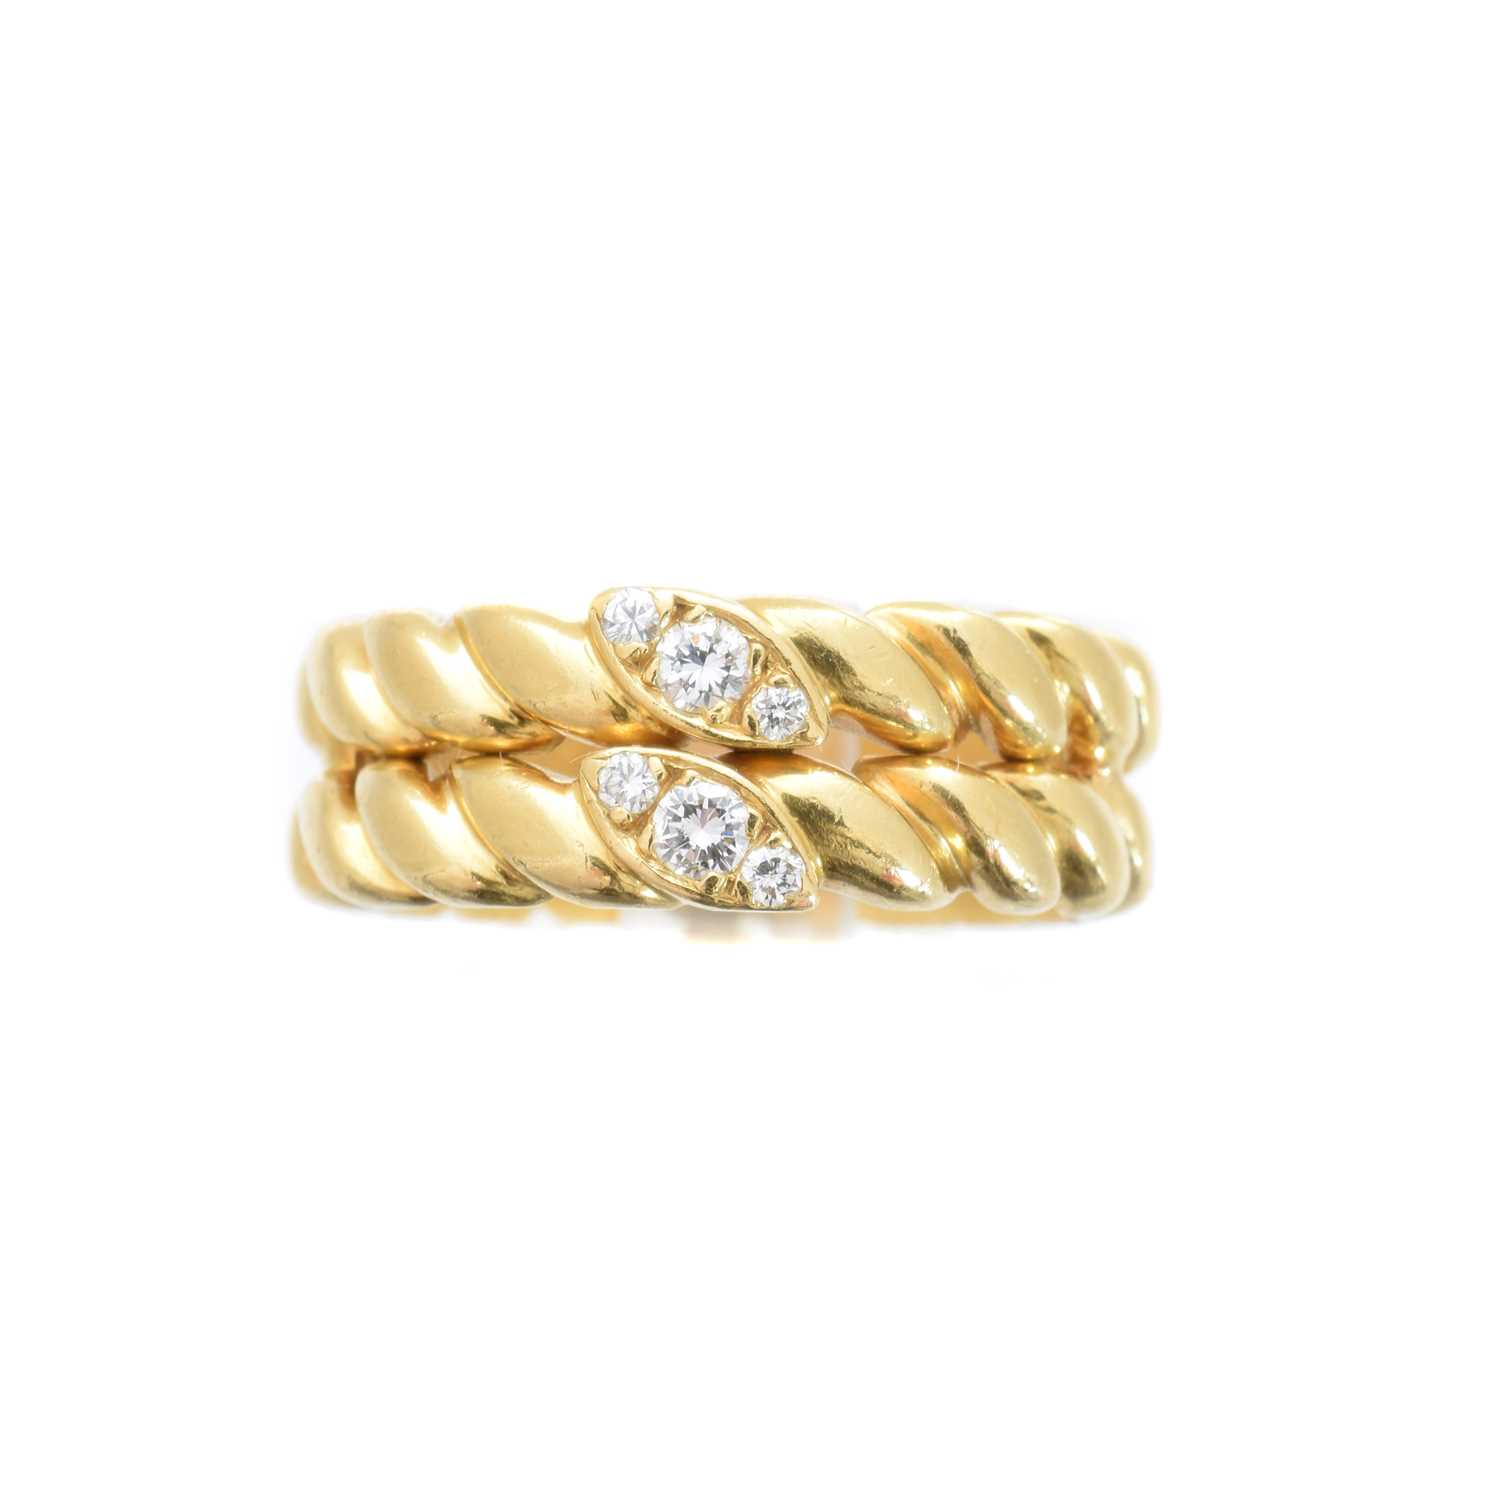 Lot 199 - An 18ct gold diamond band ring by Van Cleef & Arpels